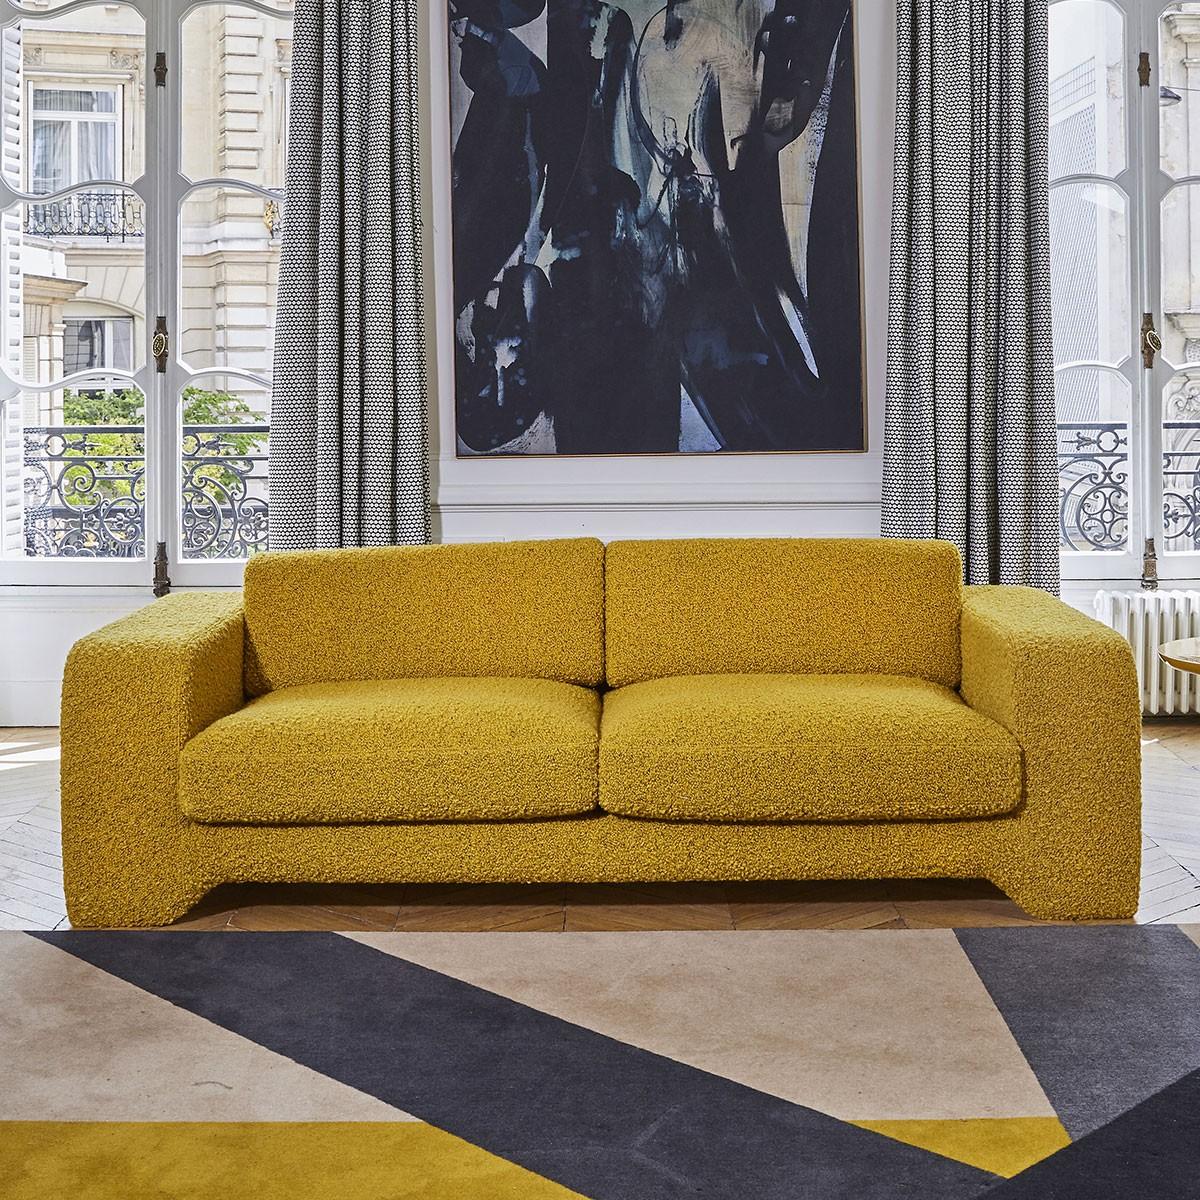 Popus Editions Giovanna 4 seater sofa in Amber Como Velvet Upholstery

Giovanna is a sofa with a strong profile. A sober, plush line, with this famous detail that changes everything, so as not to forget its strength of character and this charming